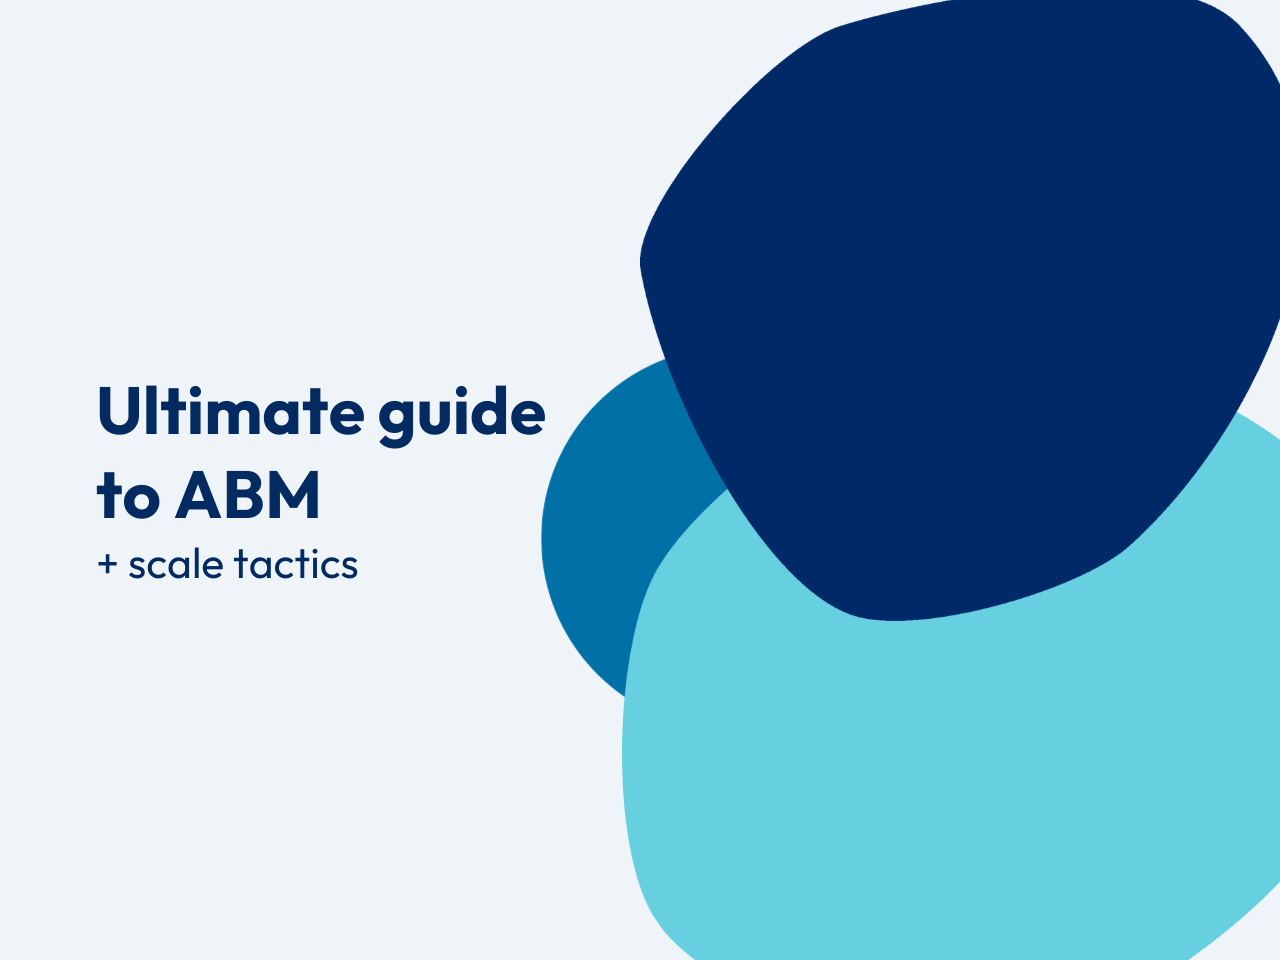 Feature image for Turtl pillar post called Ultimate guide to ABM + scale tactics